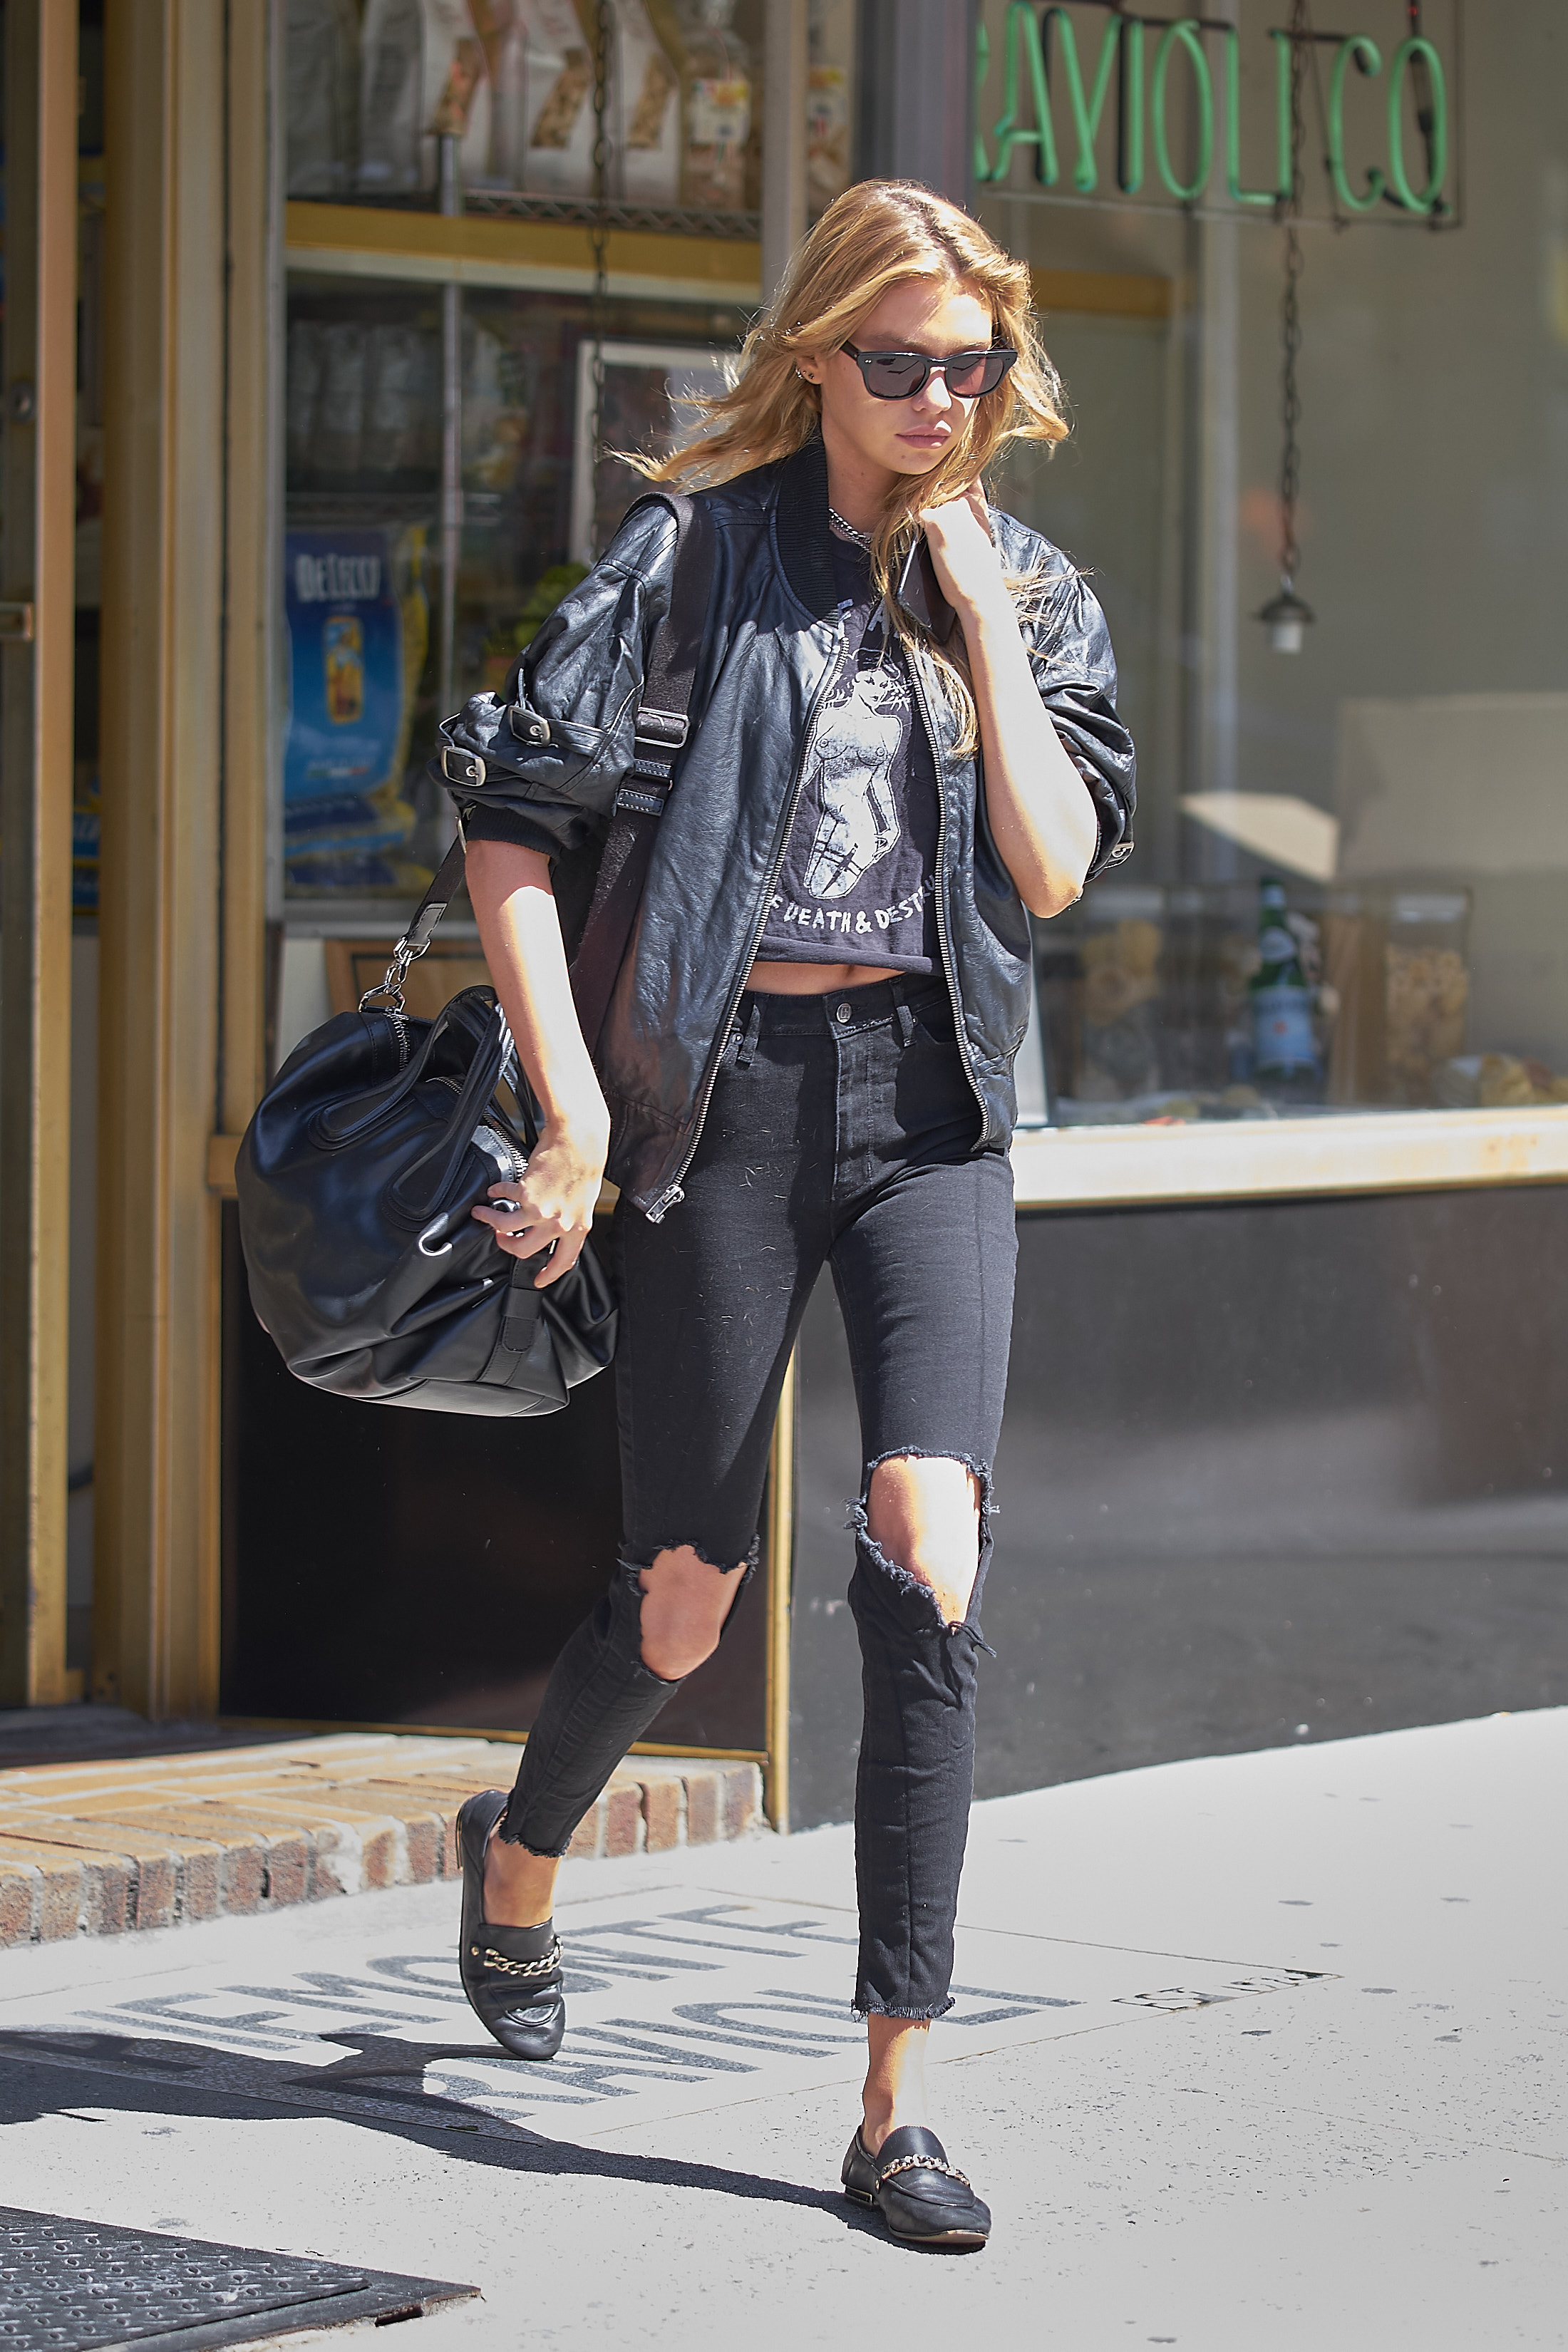 stella-maxwell-out-in-nyc-9117-2.jpg